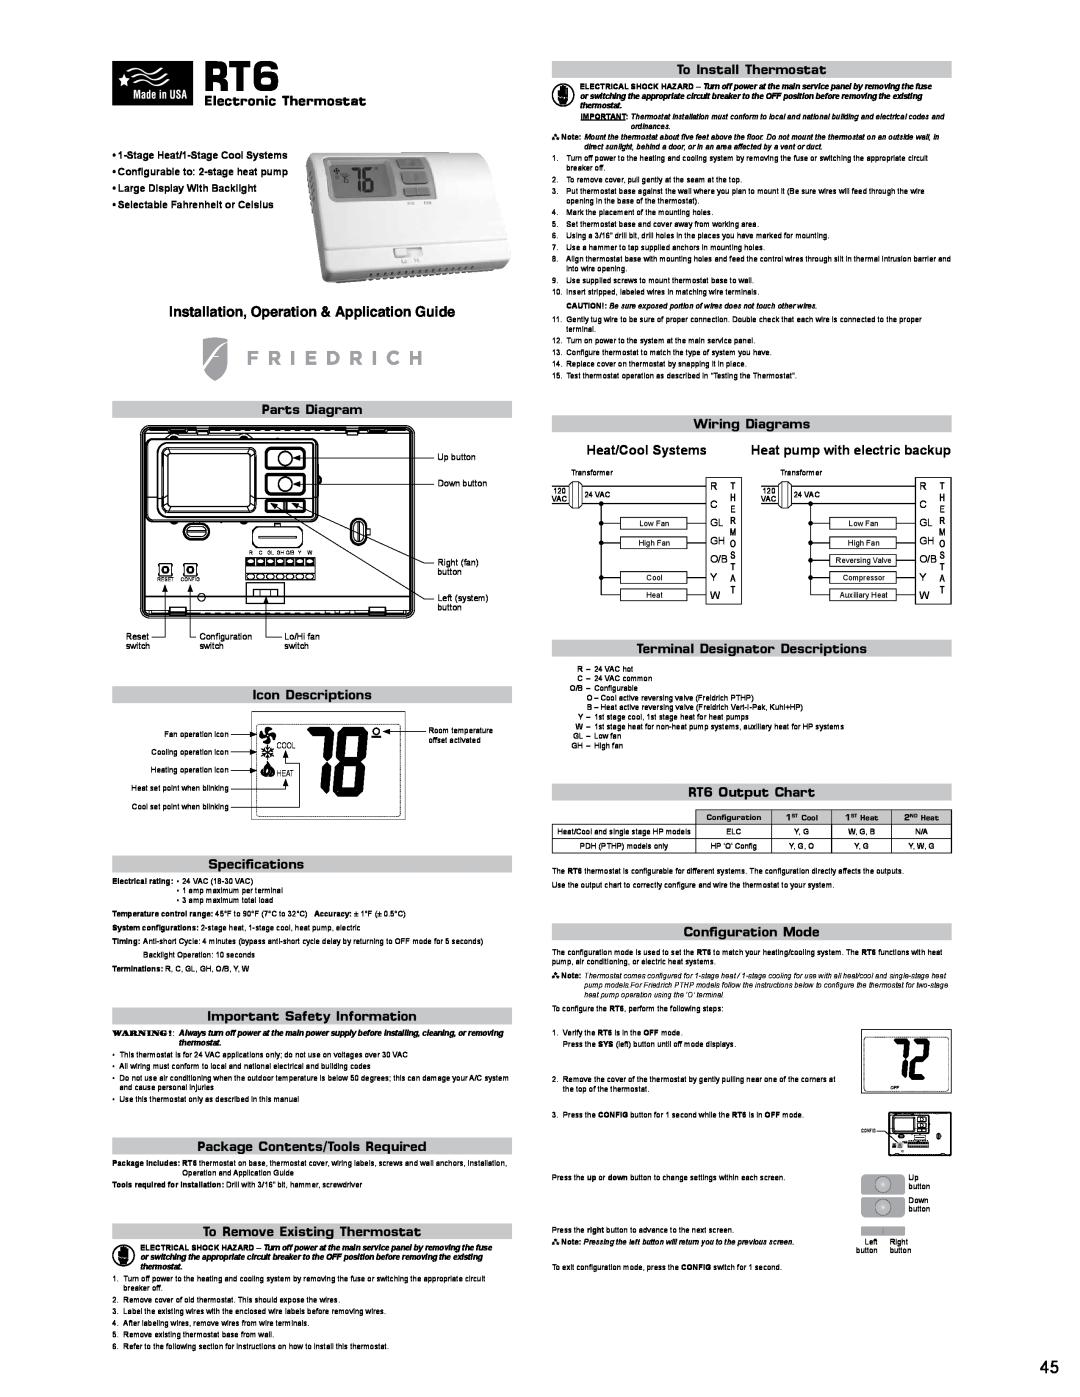 Friedrich PTAC - R410A service manual Installation, Operation & Application Guide 